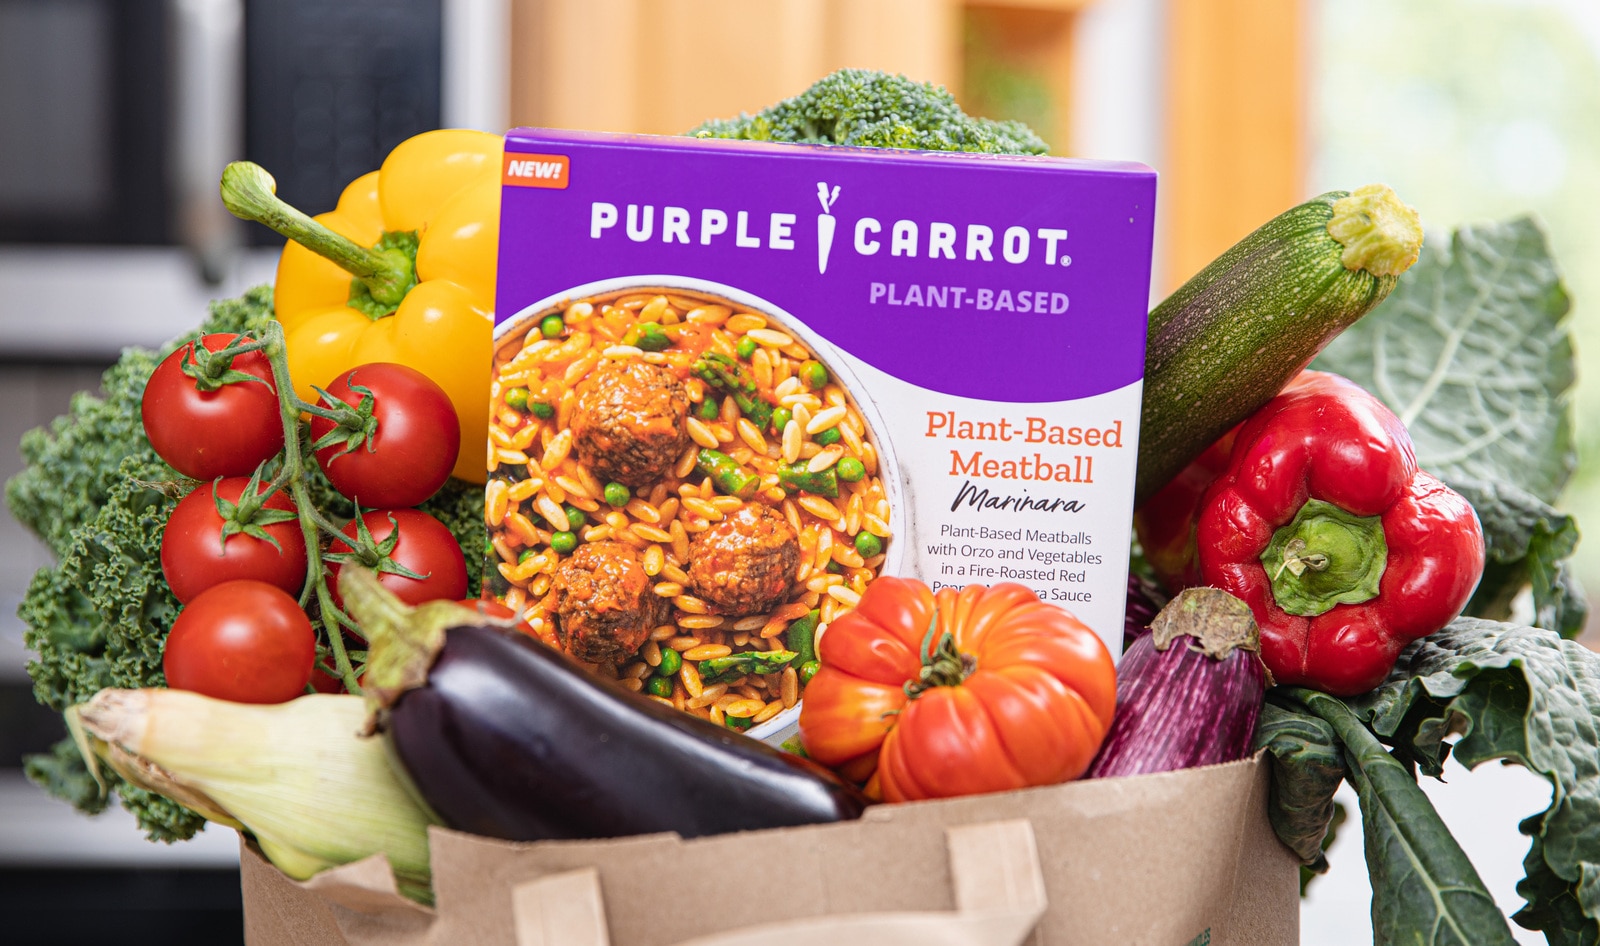 Meal Kit Brand Purple Carrot Launches Frozen Vegan Bowls Made with Gardein at Whole Foods